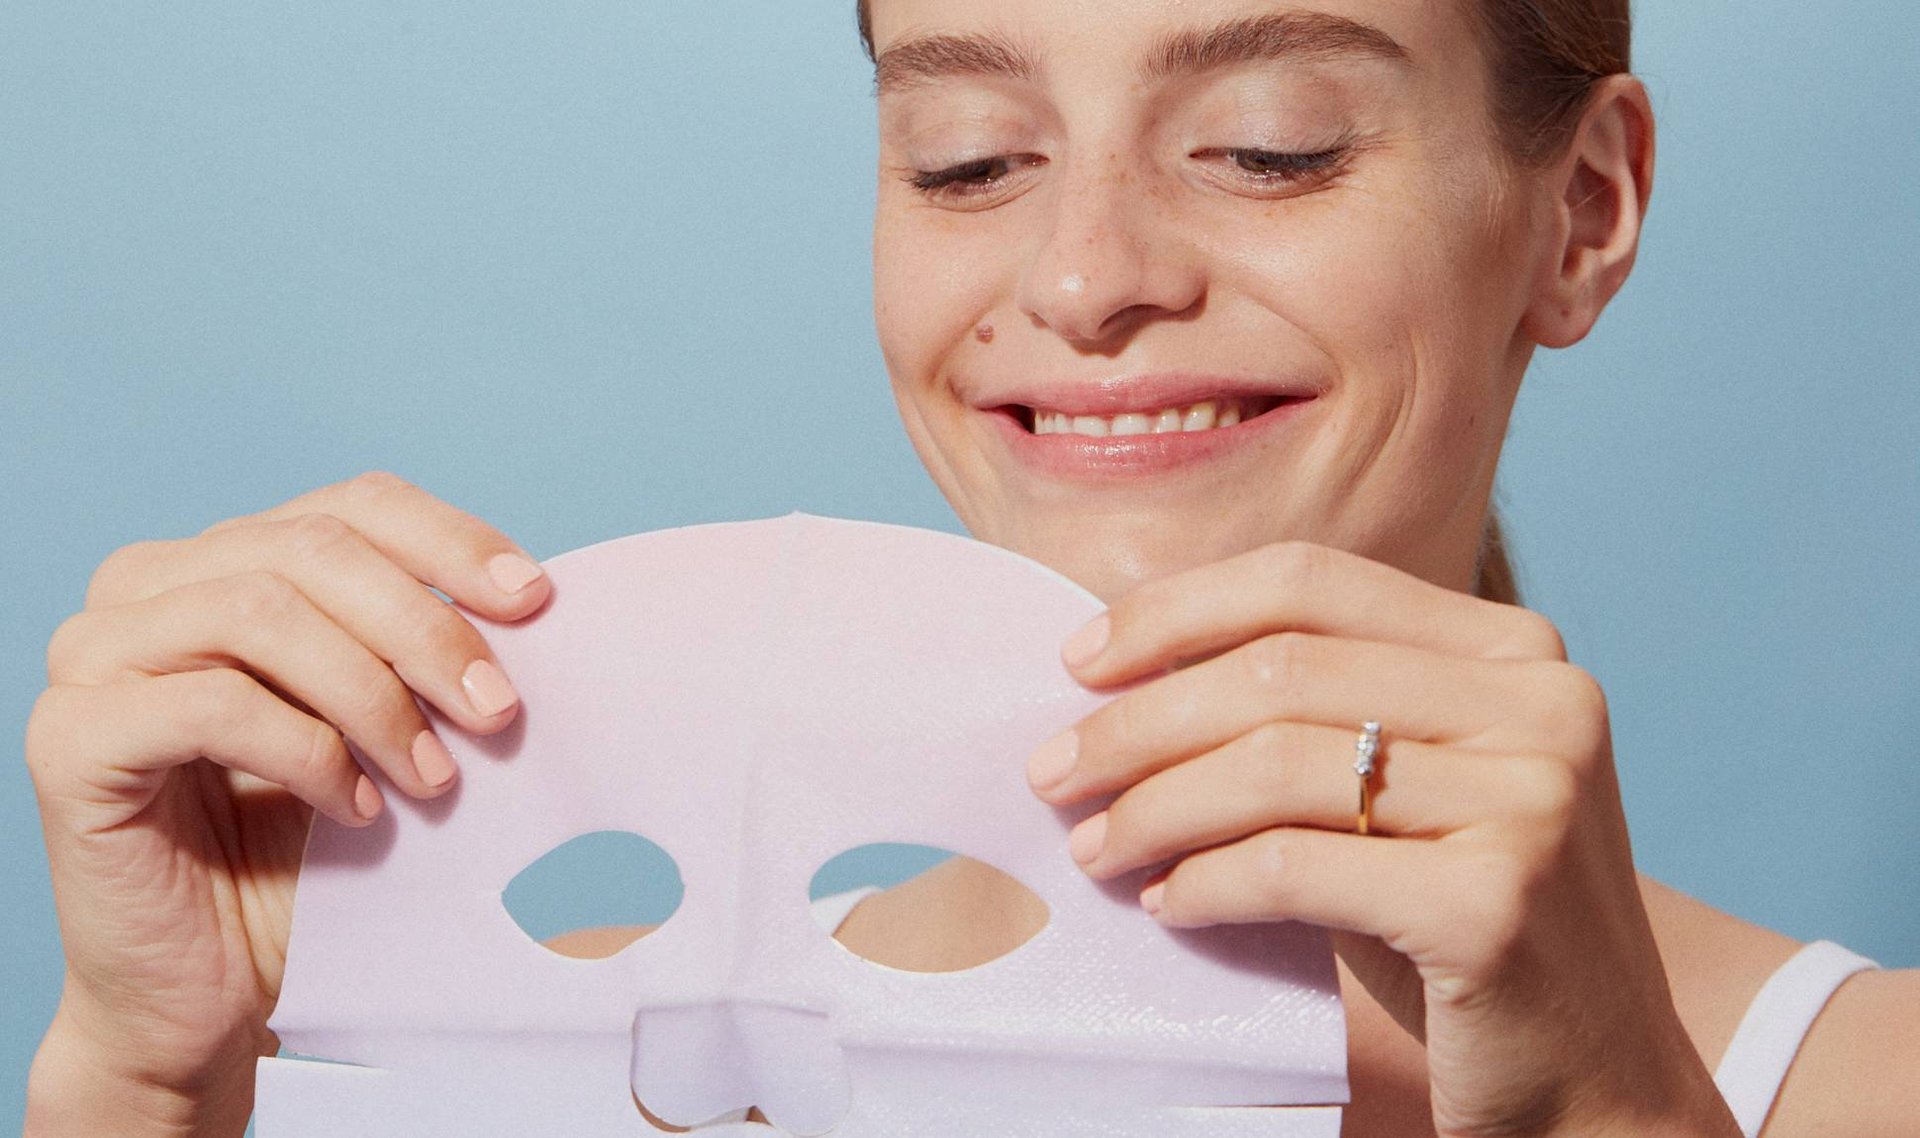 5 Sheet Masks to Shop if You Have Oily Skin